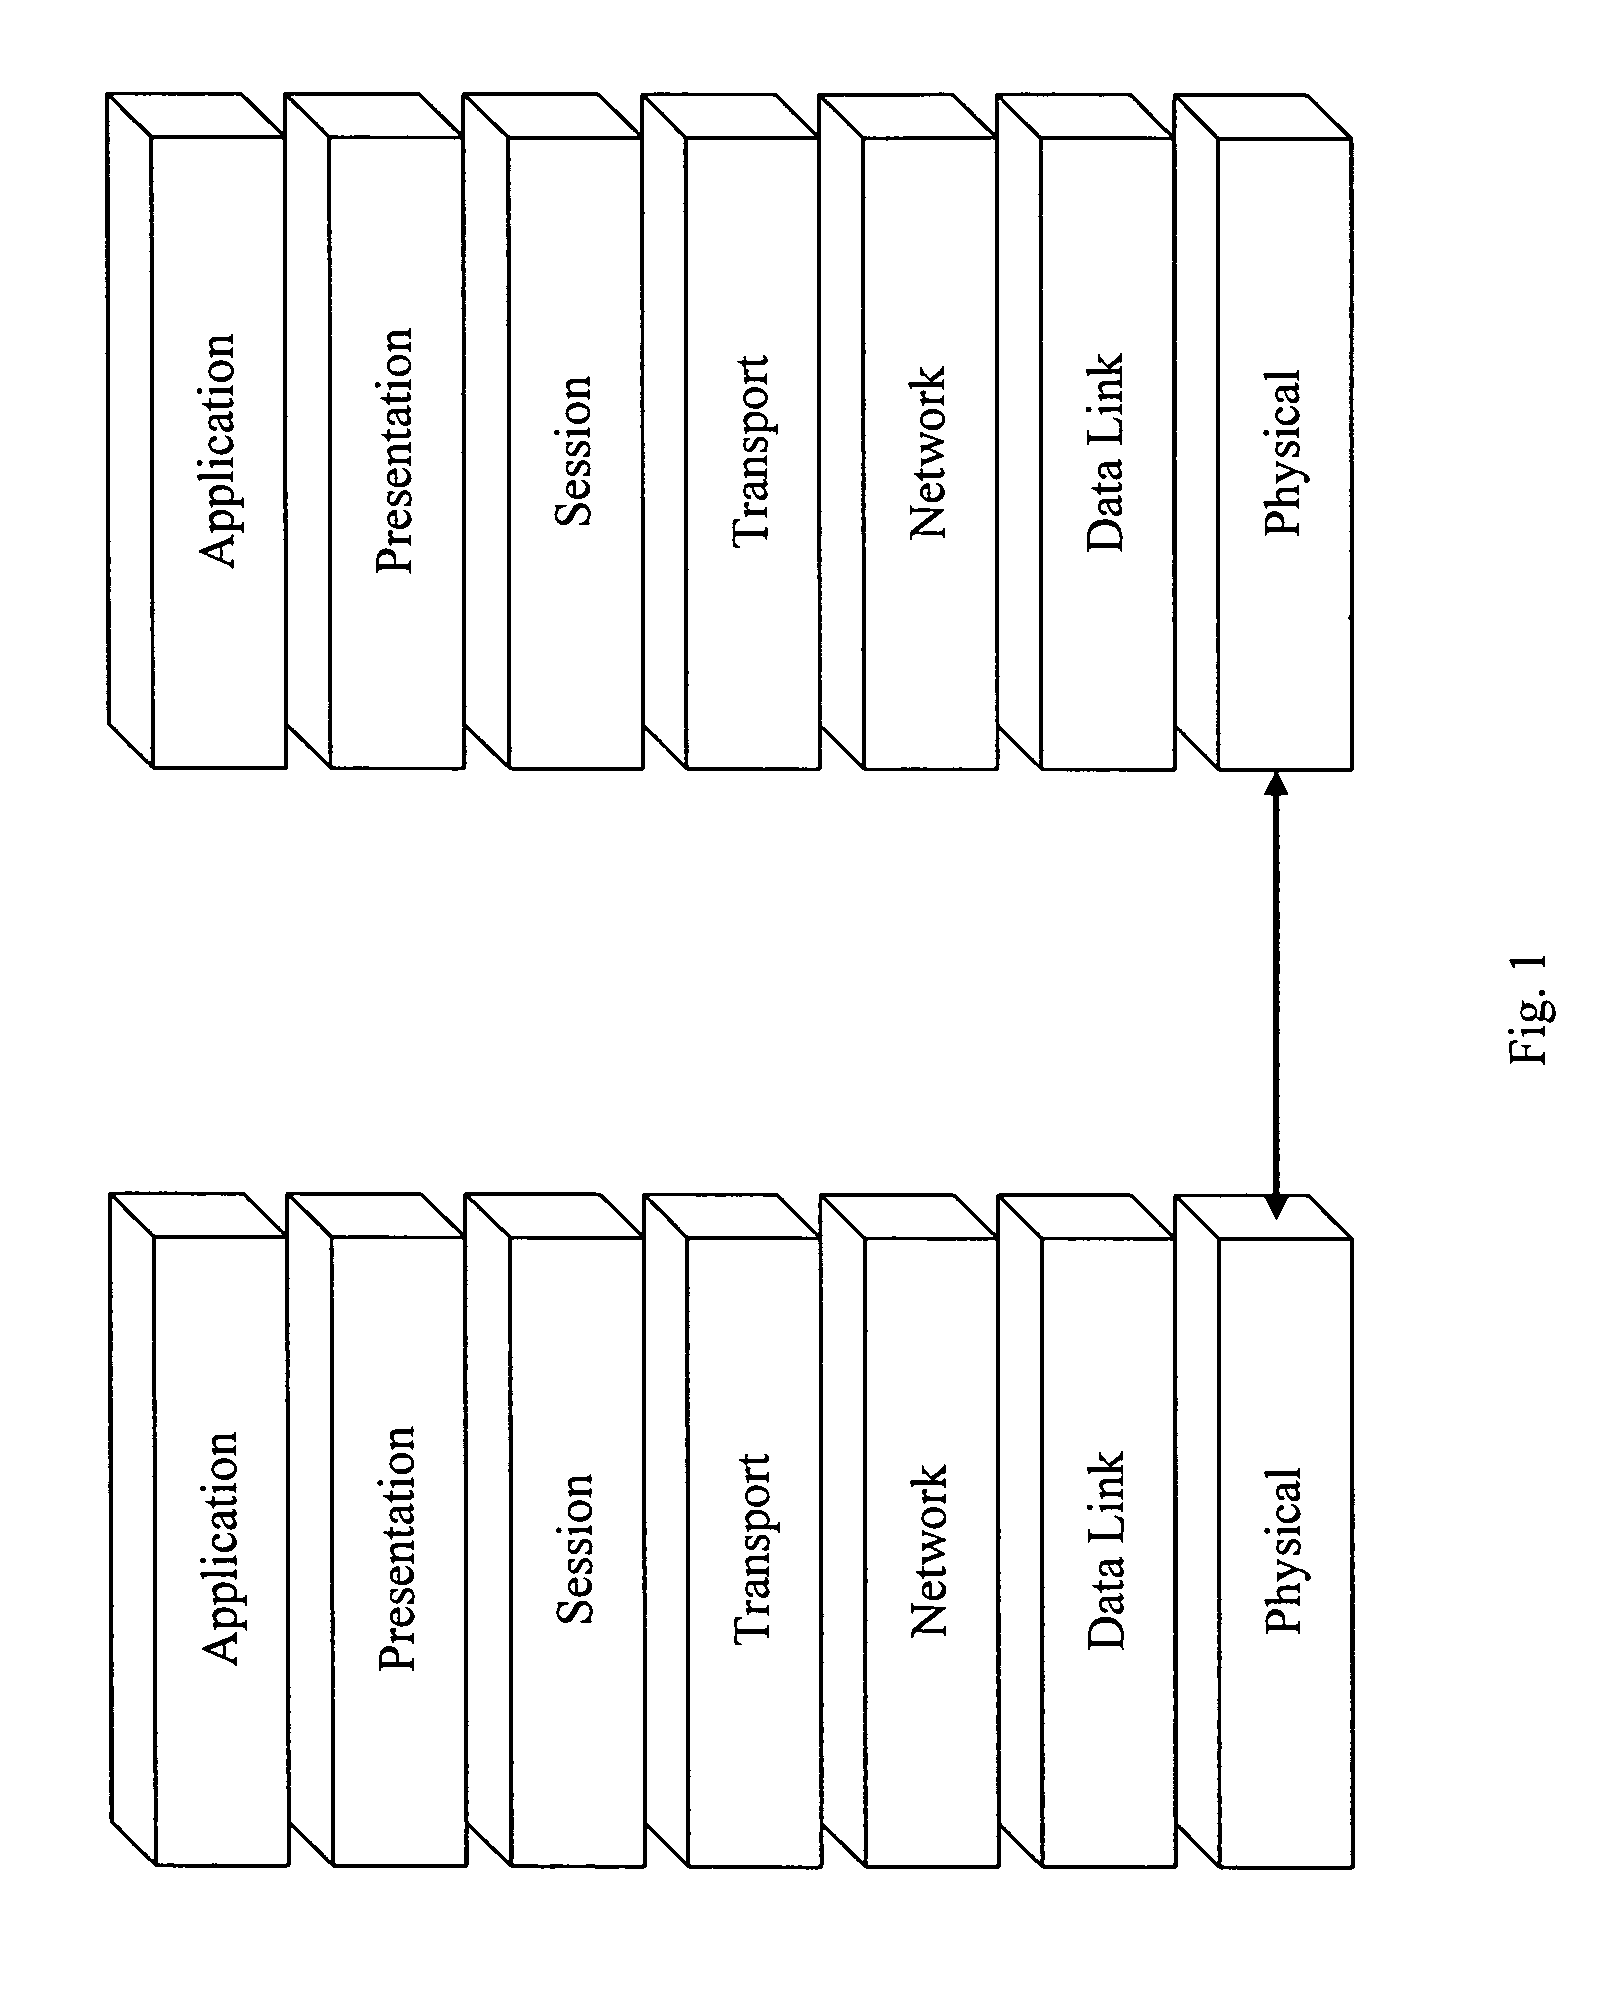 Determining the service set identification of an access point in a wireless local area network